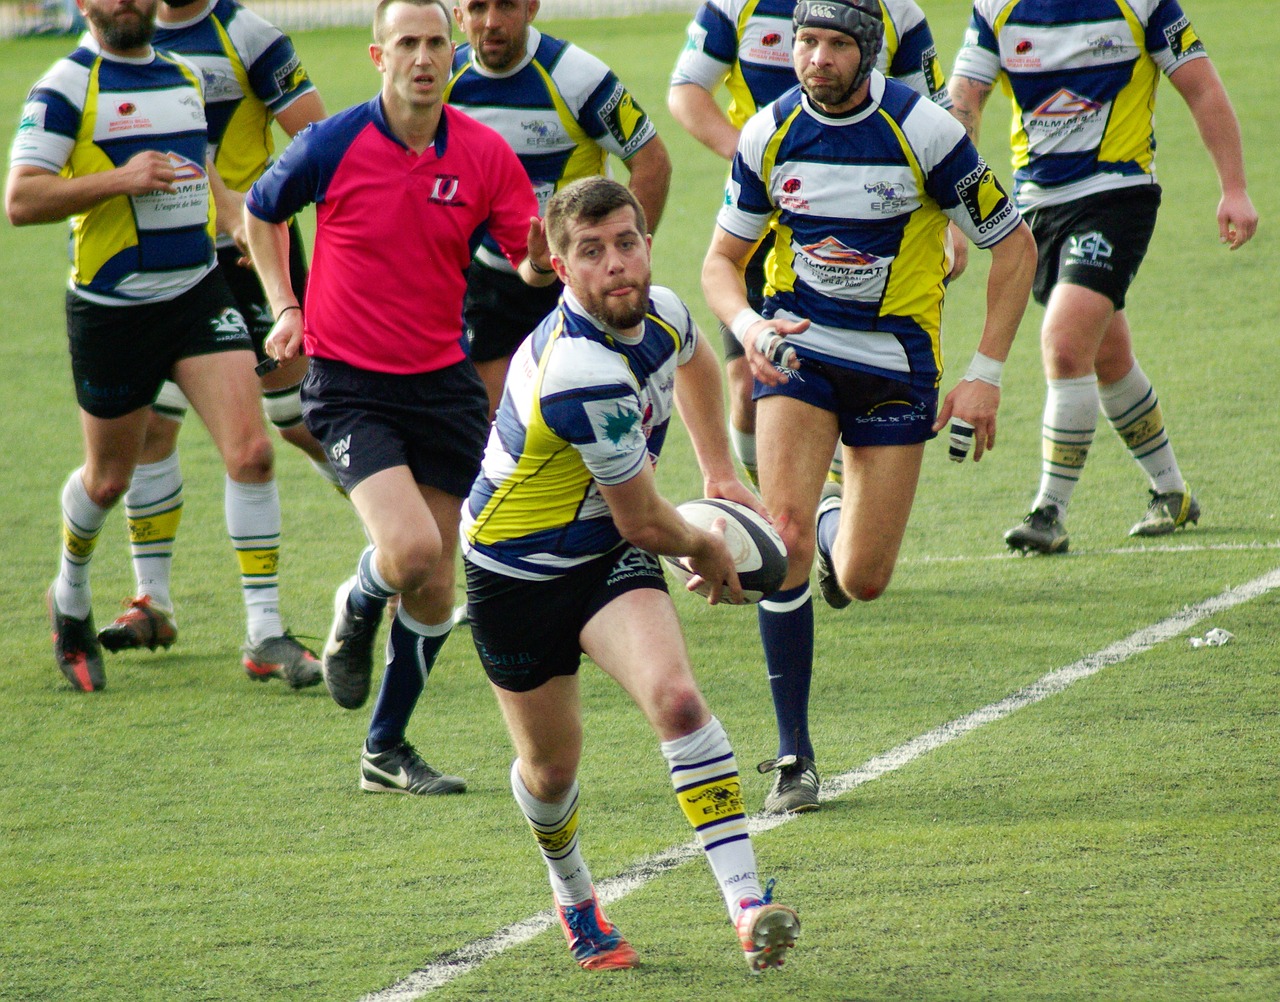 xv rugby ball action free photo